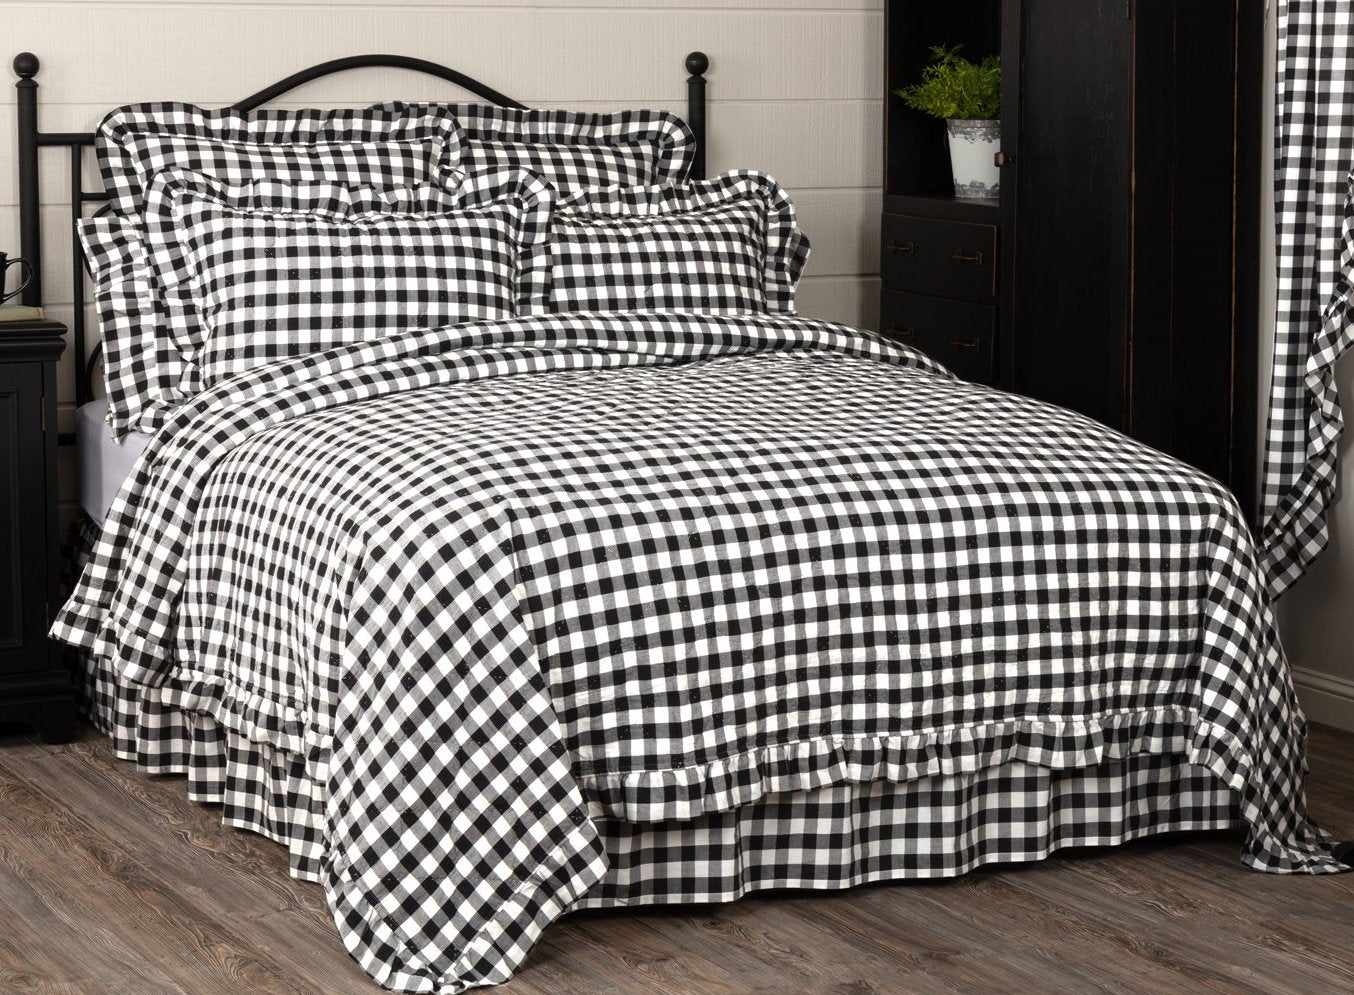 Annie Buffalo Black Check Ruffled Twin Quilt Coverlet 68wx86l